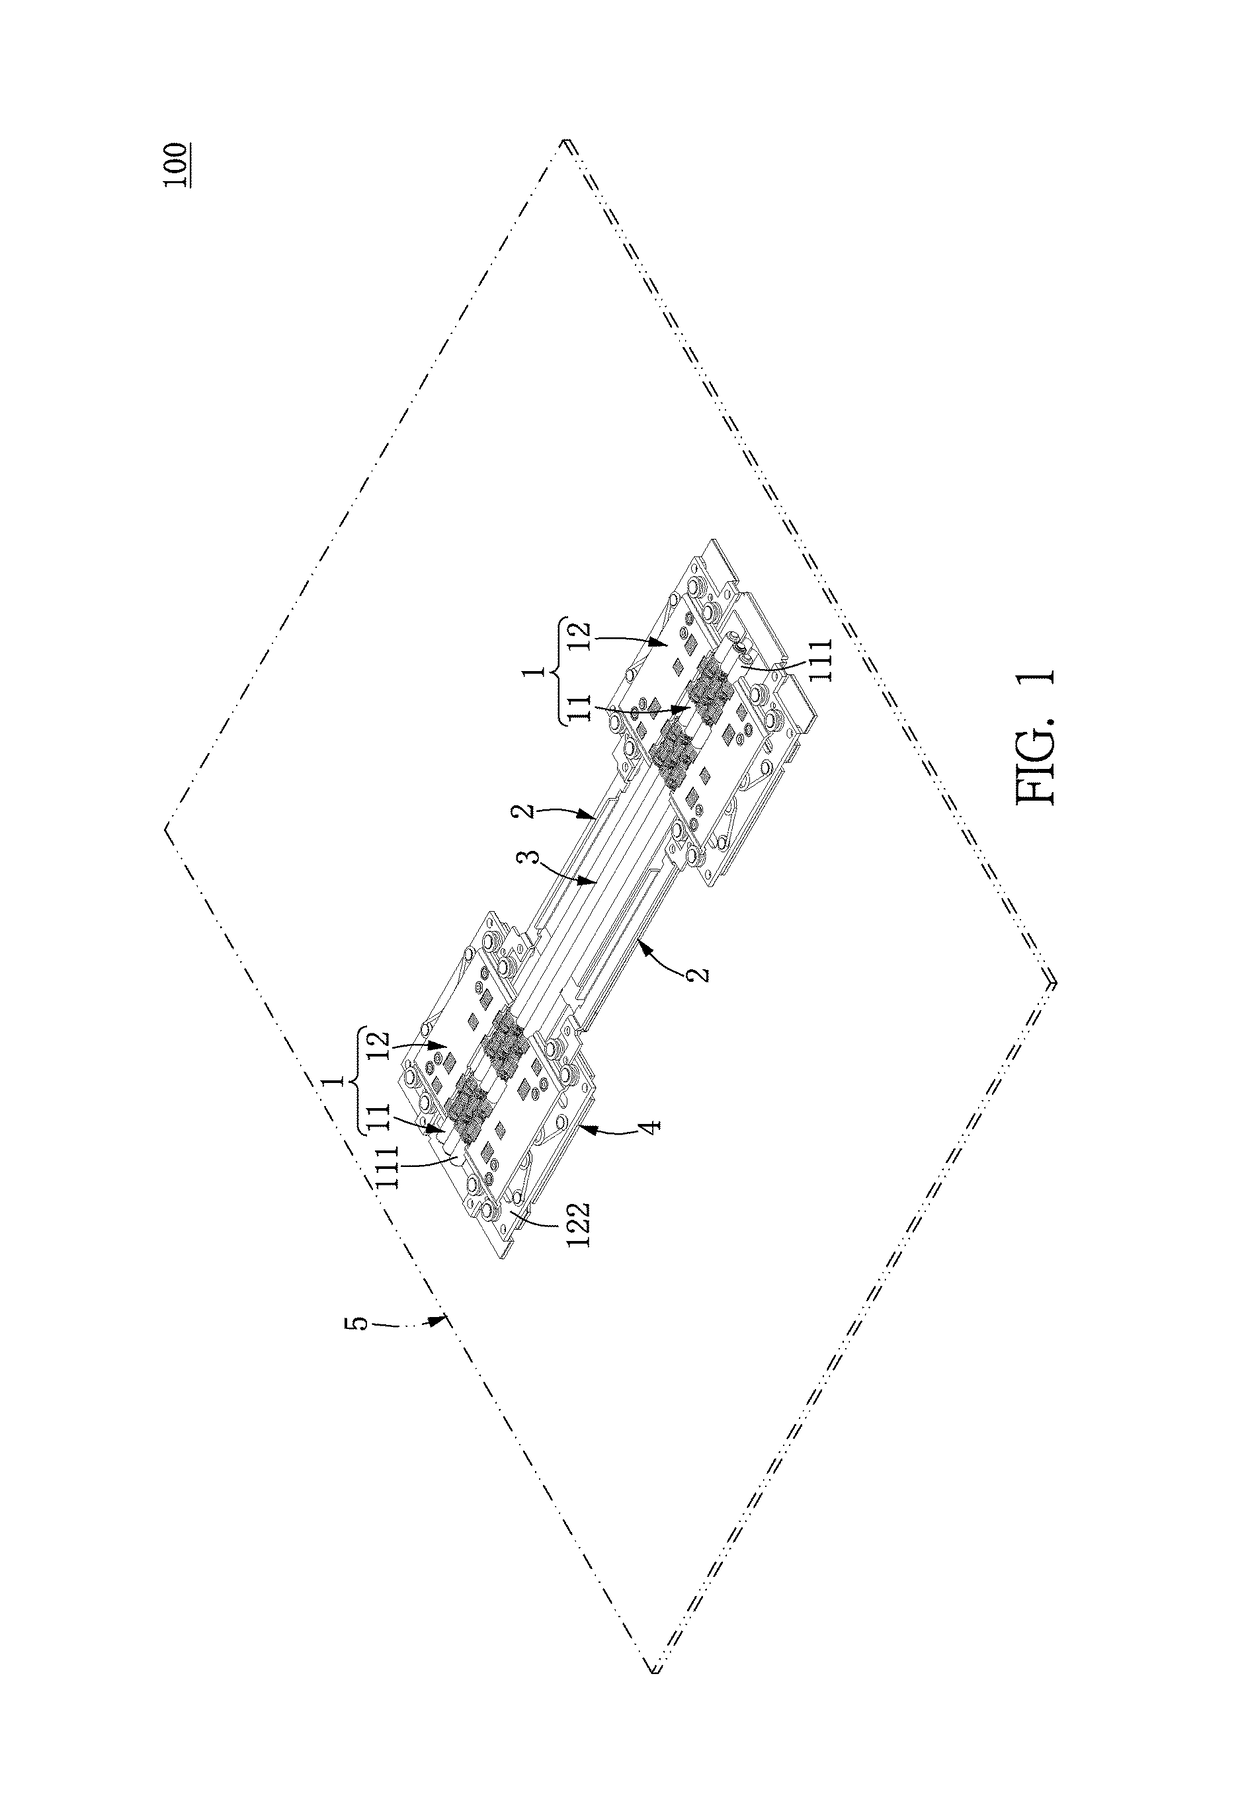 Bendable display apparatus and supporting device